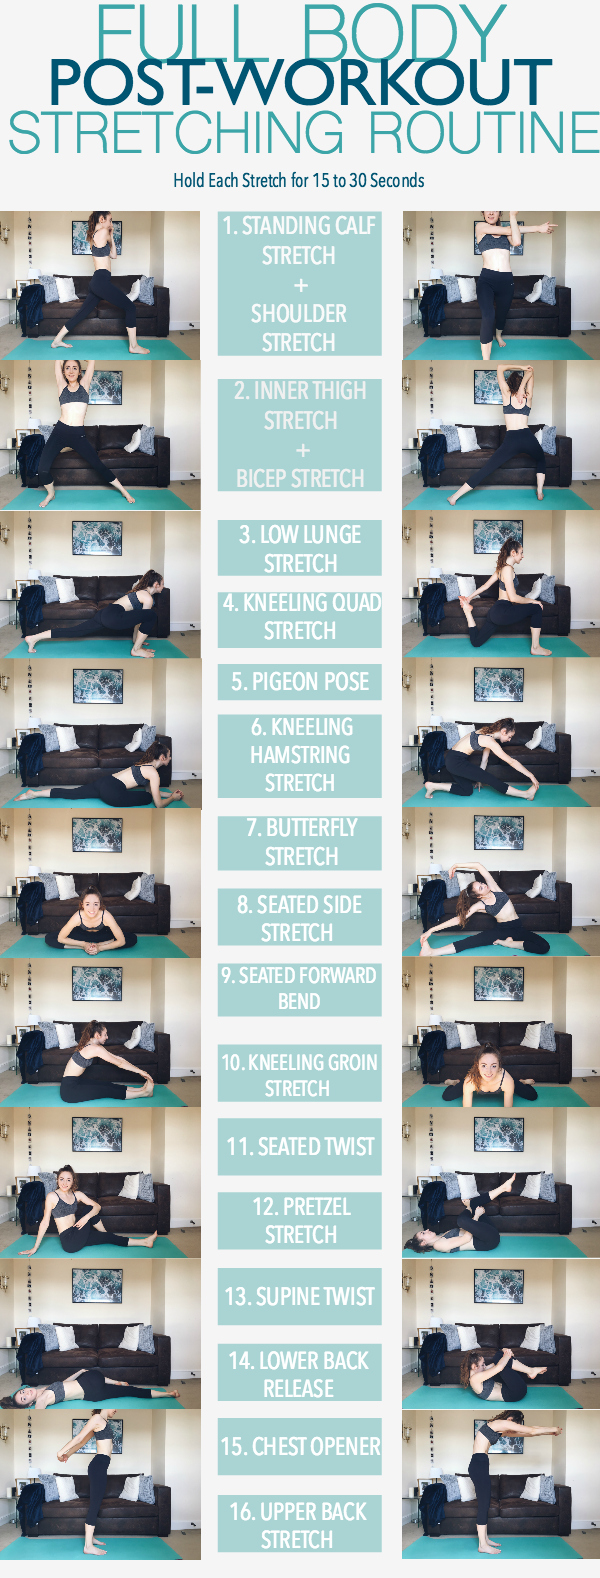 Full Body Post-Workout Stretching Routine that will help your muscles recover after a workout. Complete these stretches each for 15-30 seconds to get a deep stretch. This stretching routine should take around 17 minutes however you can pick and choose what you want to focus on. Stretching || Post-Workout || Health || Fitness